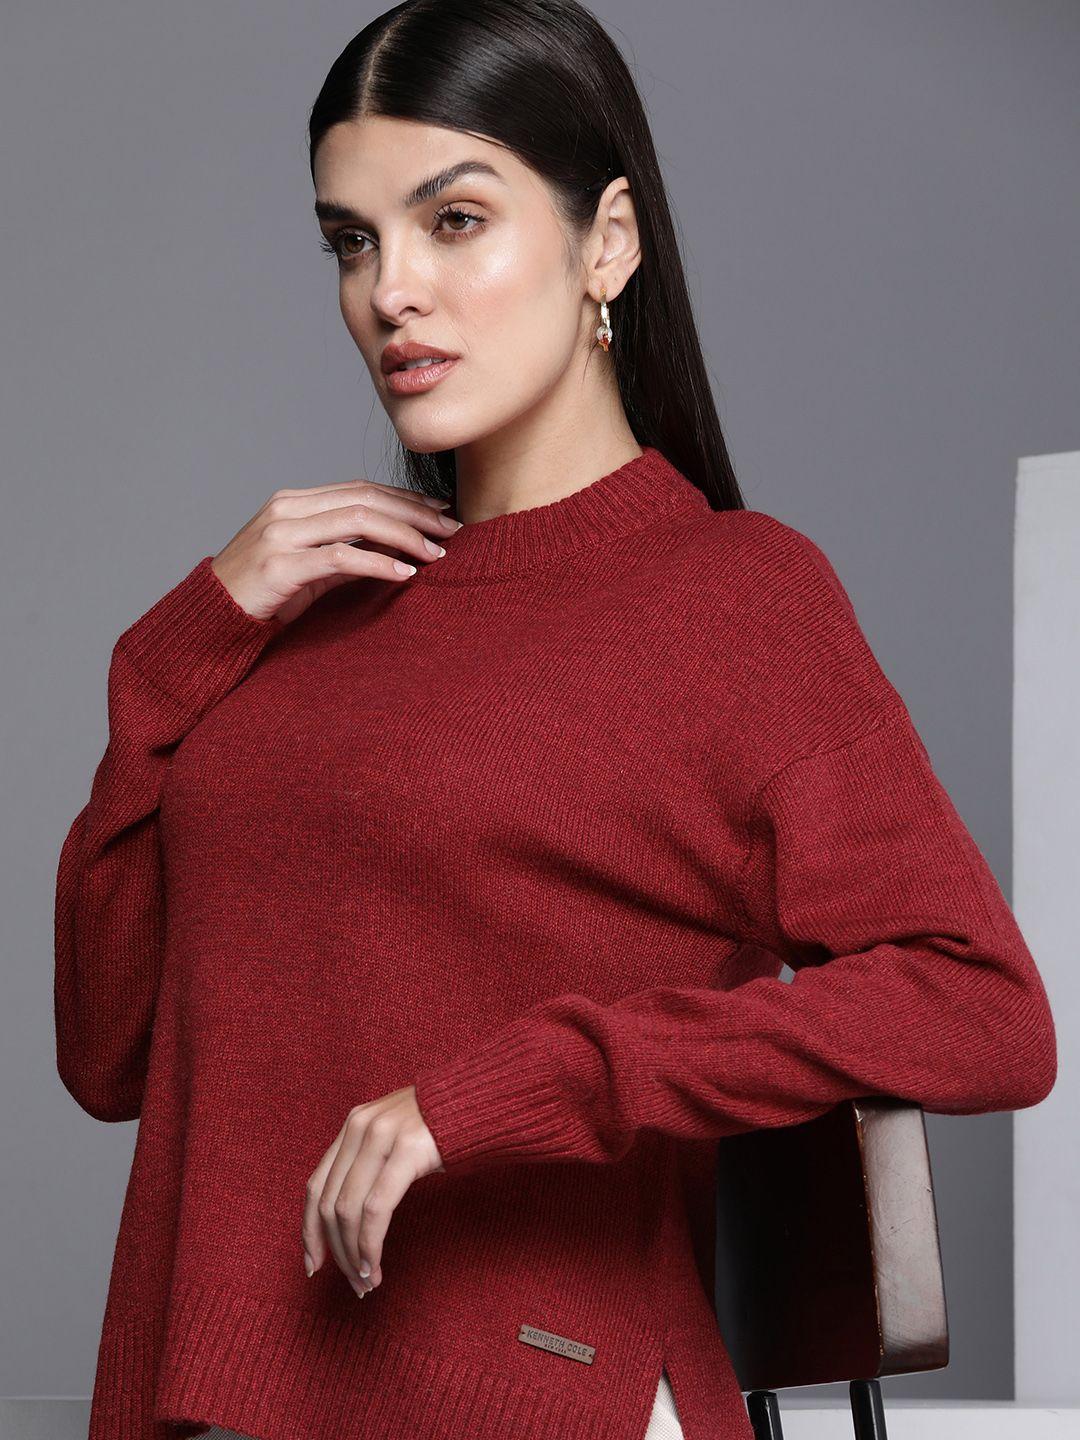 kenneth-cole-flair-women-maroon-self-design-open-knit-pullover-sweater